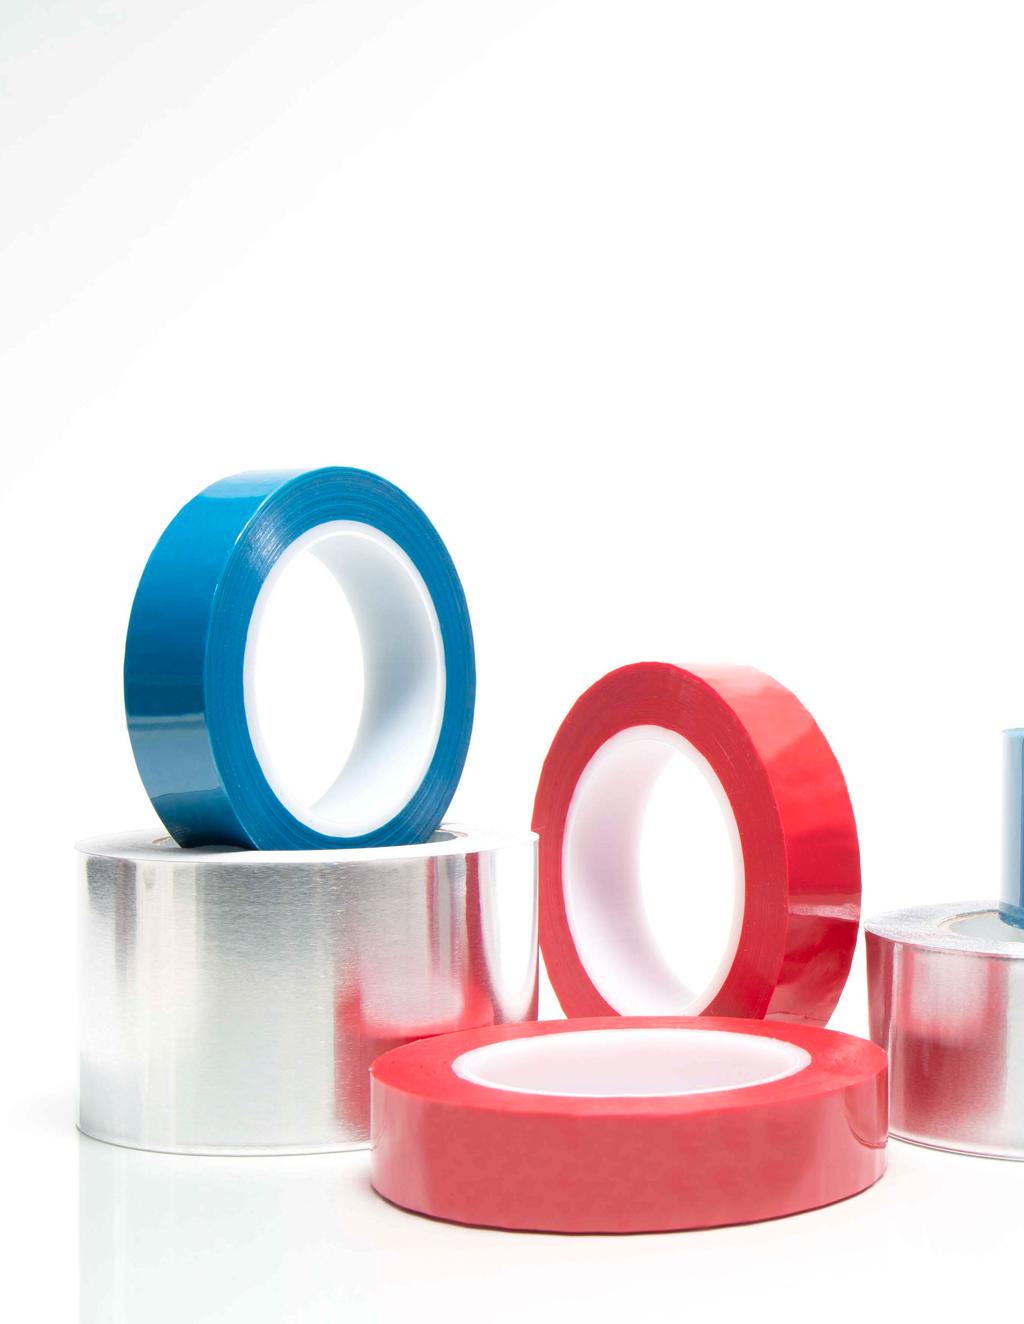 IDEAL TAPE CO., INC. A Division of American Biltrite Inc. 1400 Middlesex Street Lowell, MA 01851 PH: (800) 229-9148 FAX: (800) 897-8273 EMAIL: info@idealtape.